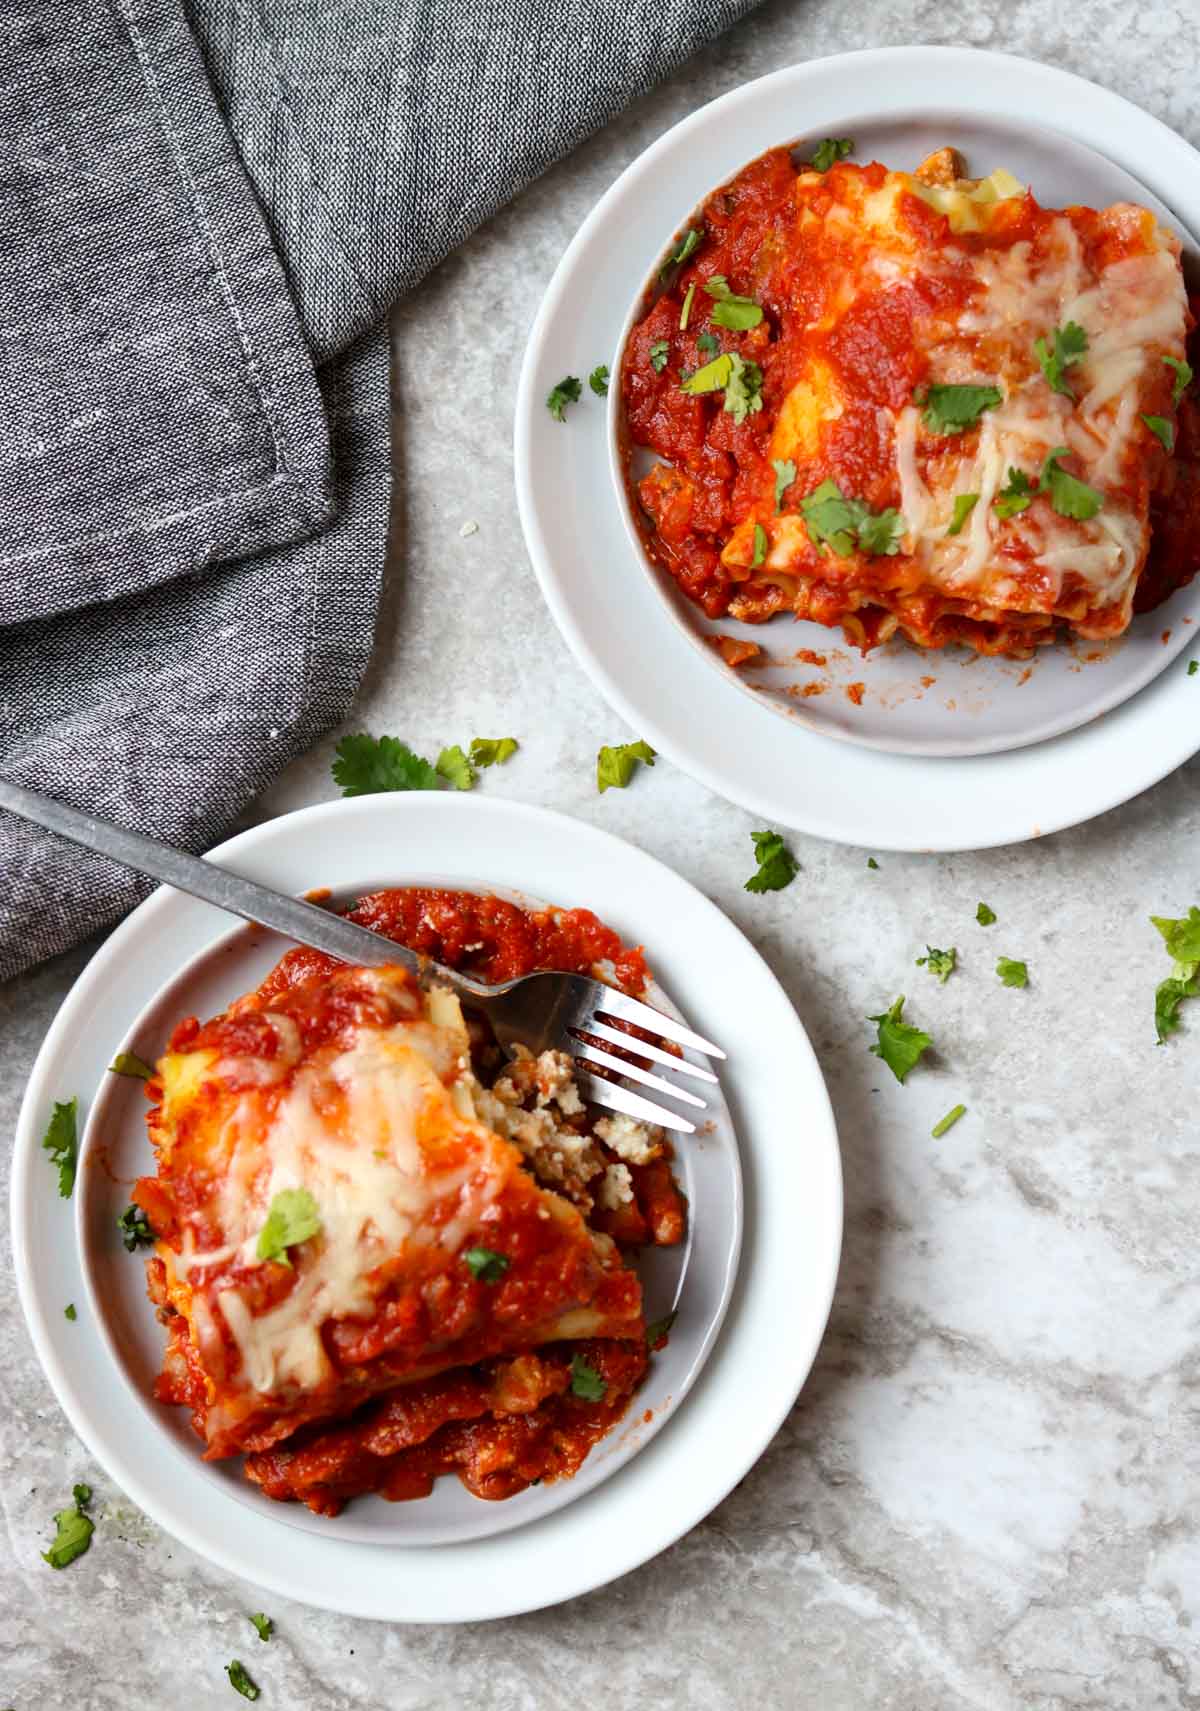 Two lasagna roll ups on white plates with one fork and a gray napkin